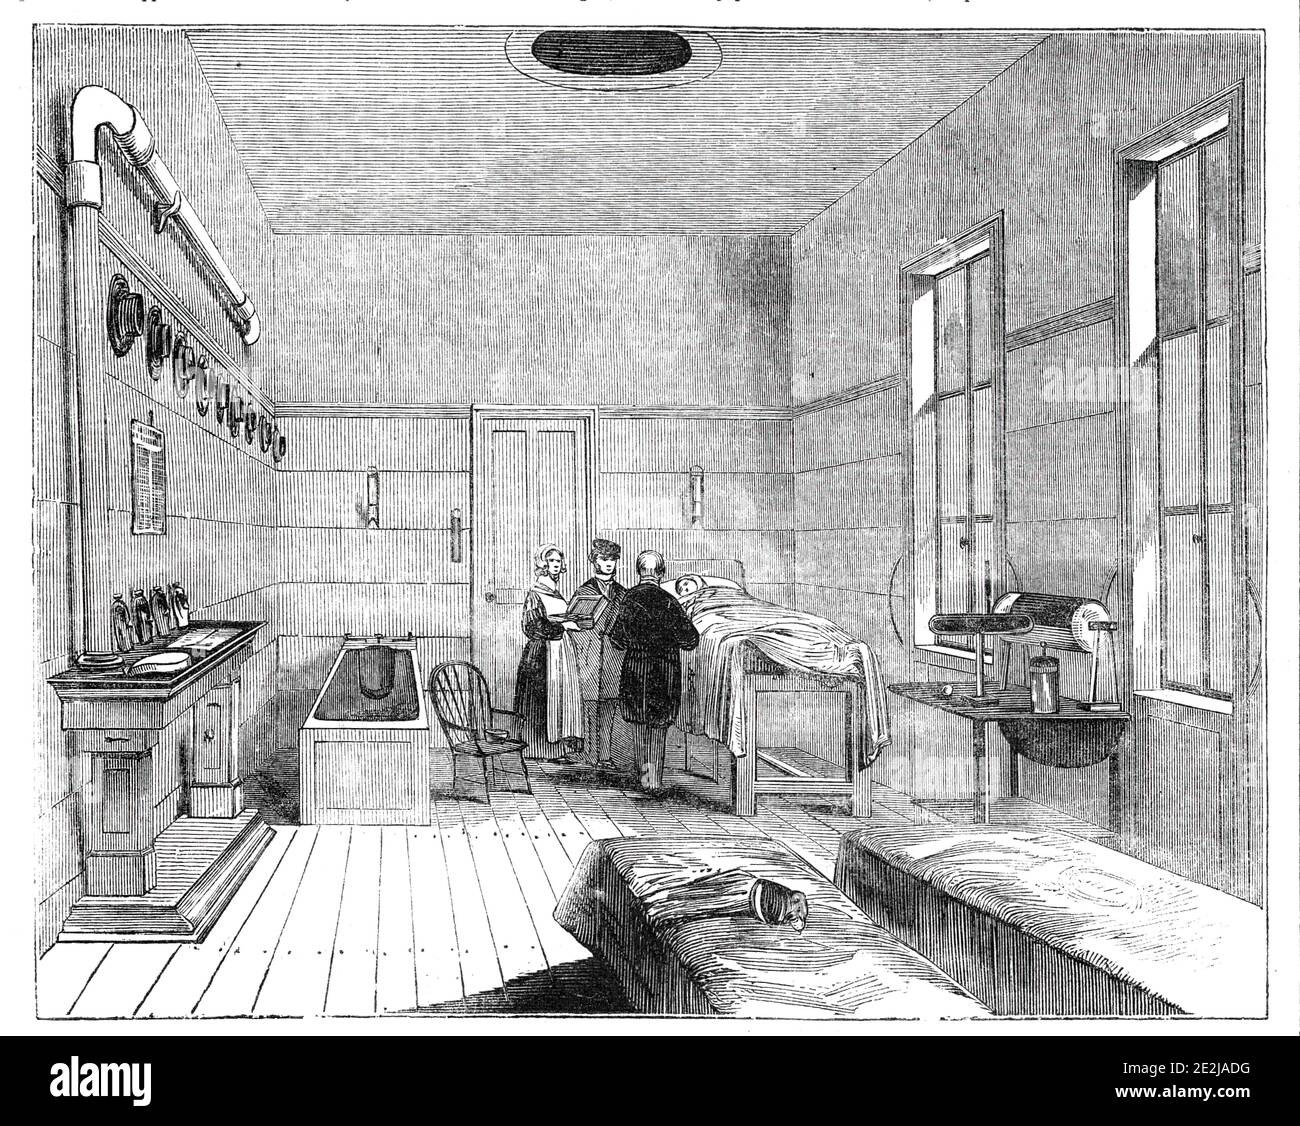 Ward of the Receiving-House of the Royal Humane Society, 1844. Facilities of the Royal Humane Society, 'for the recovery of persons apparently drowned or dead', at Hyde Park in London. Inside there was '...a room for medical attendants on the left, and waiting-room on the right; parallel with which are two separate wards for the reception of male and female patients. Each contains beds warmed with hot water, a bath, and a hot-water, metal-topped table for heating flannels, bricks, &amp;c.; the supply of water being by pipes around the walls and beneath the floor of the rooms. Next are a kitche Stock Photo